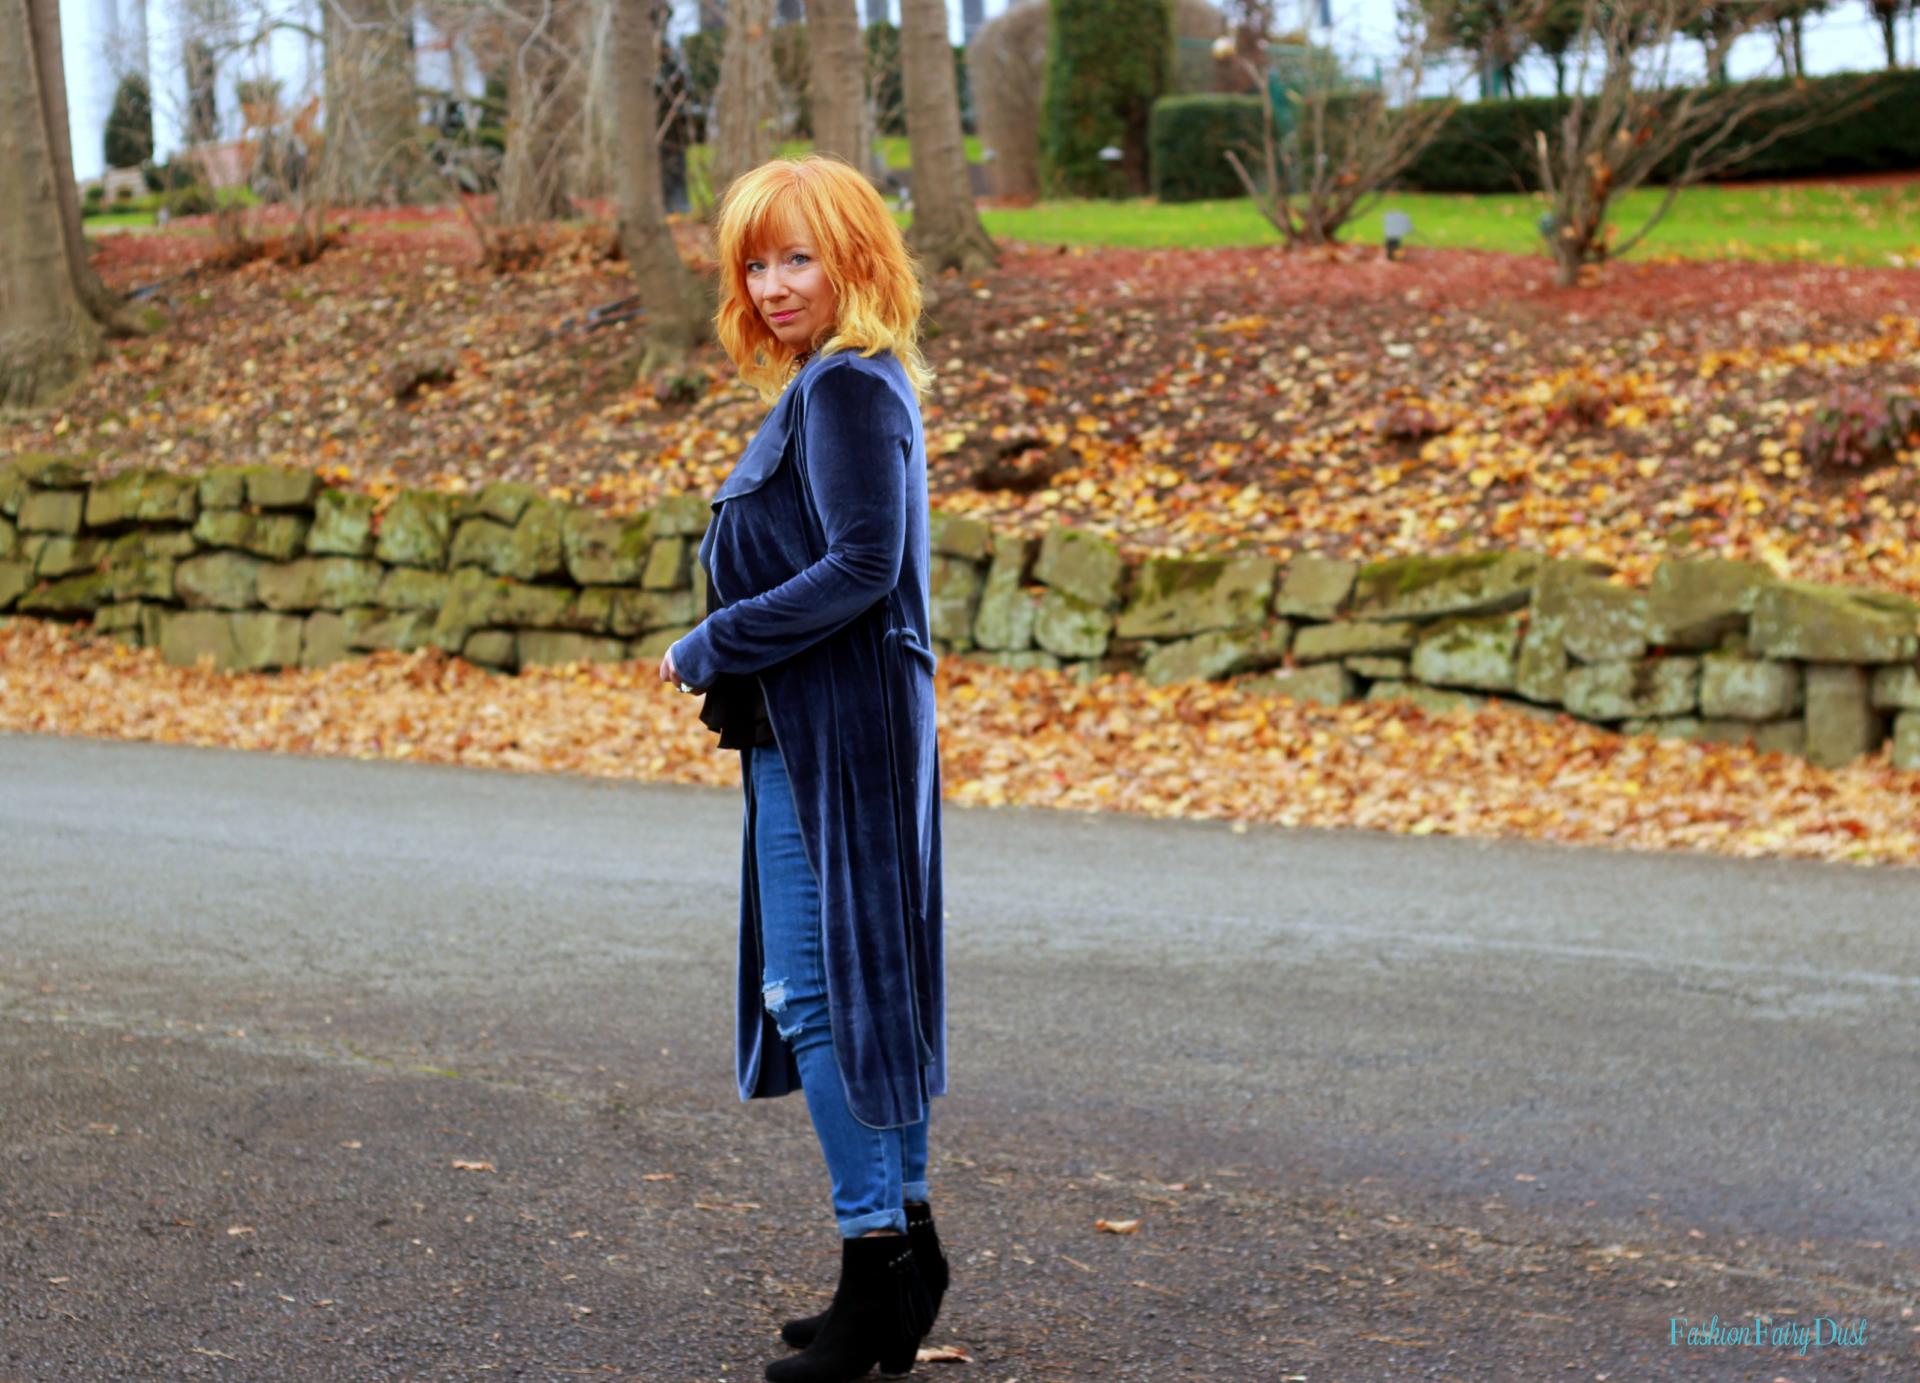 Blue velvet duster, distressed skinny jeans and ankle boots. How to style a casual holiday look.